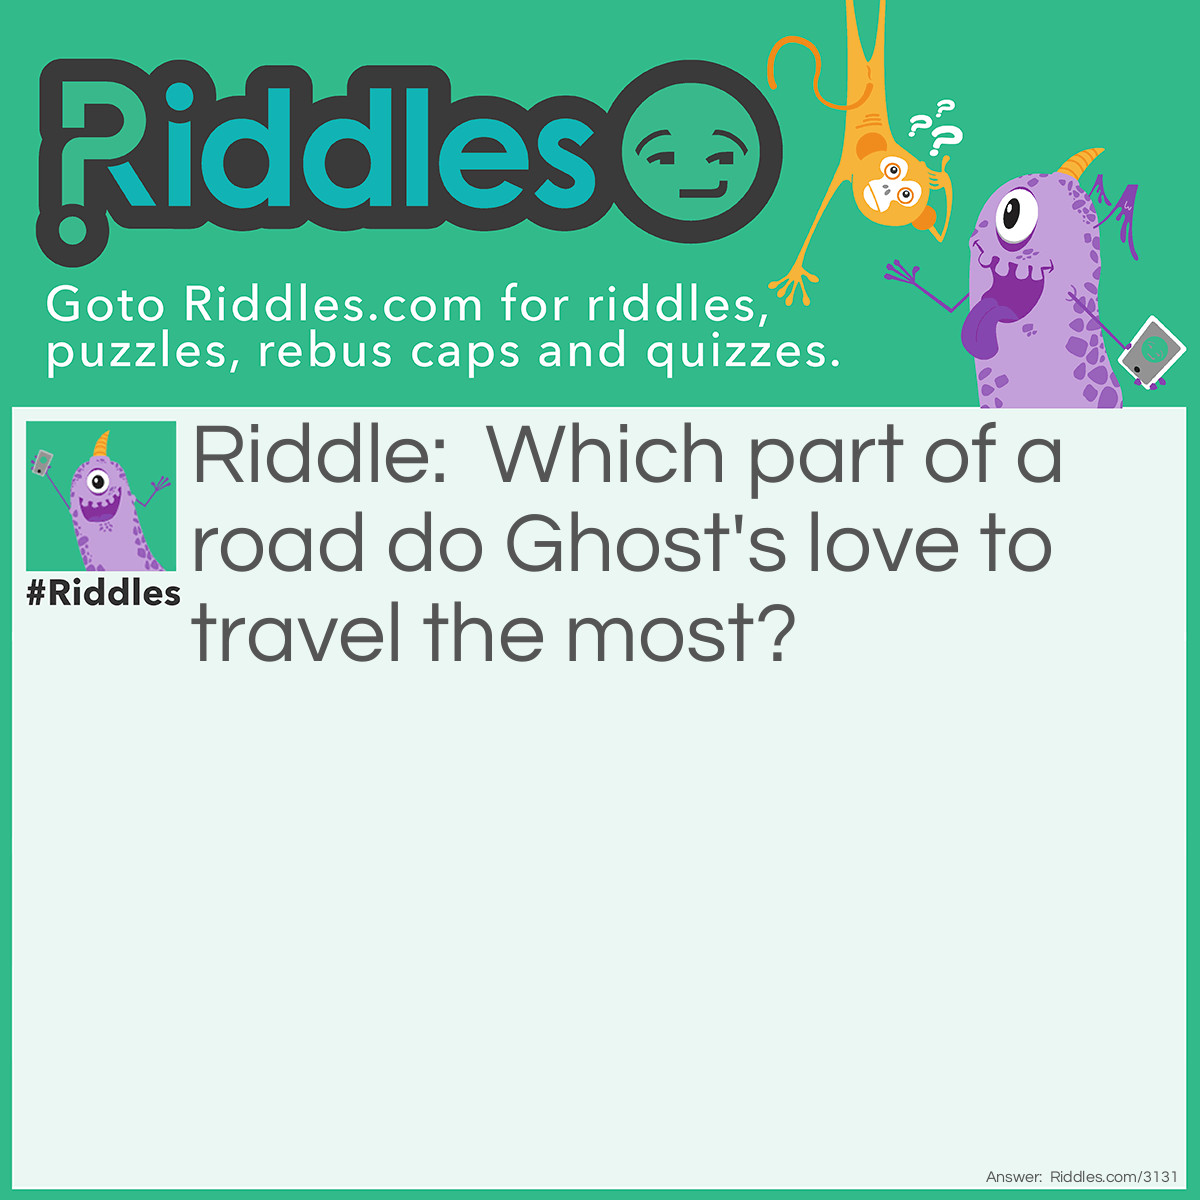 Riddle: Which part of a road do Ghost's love to travel the most? Answer: The Dead End.